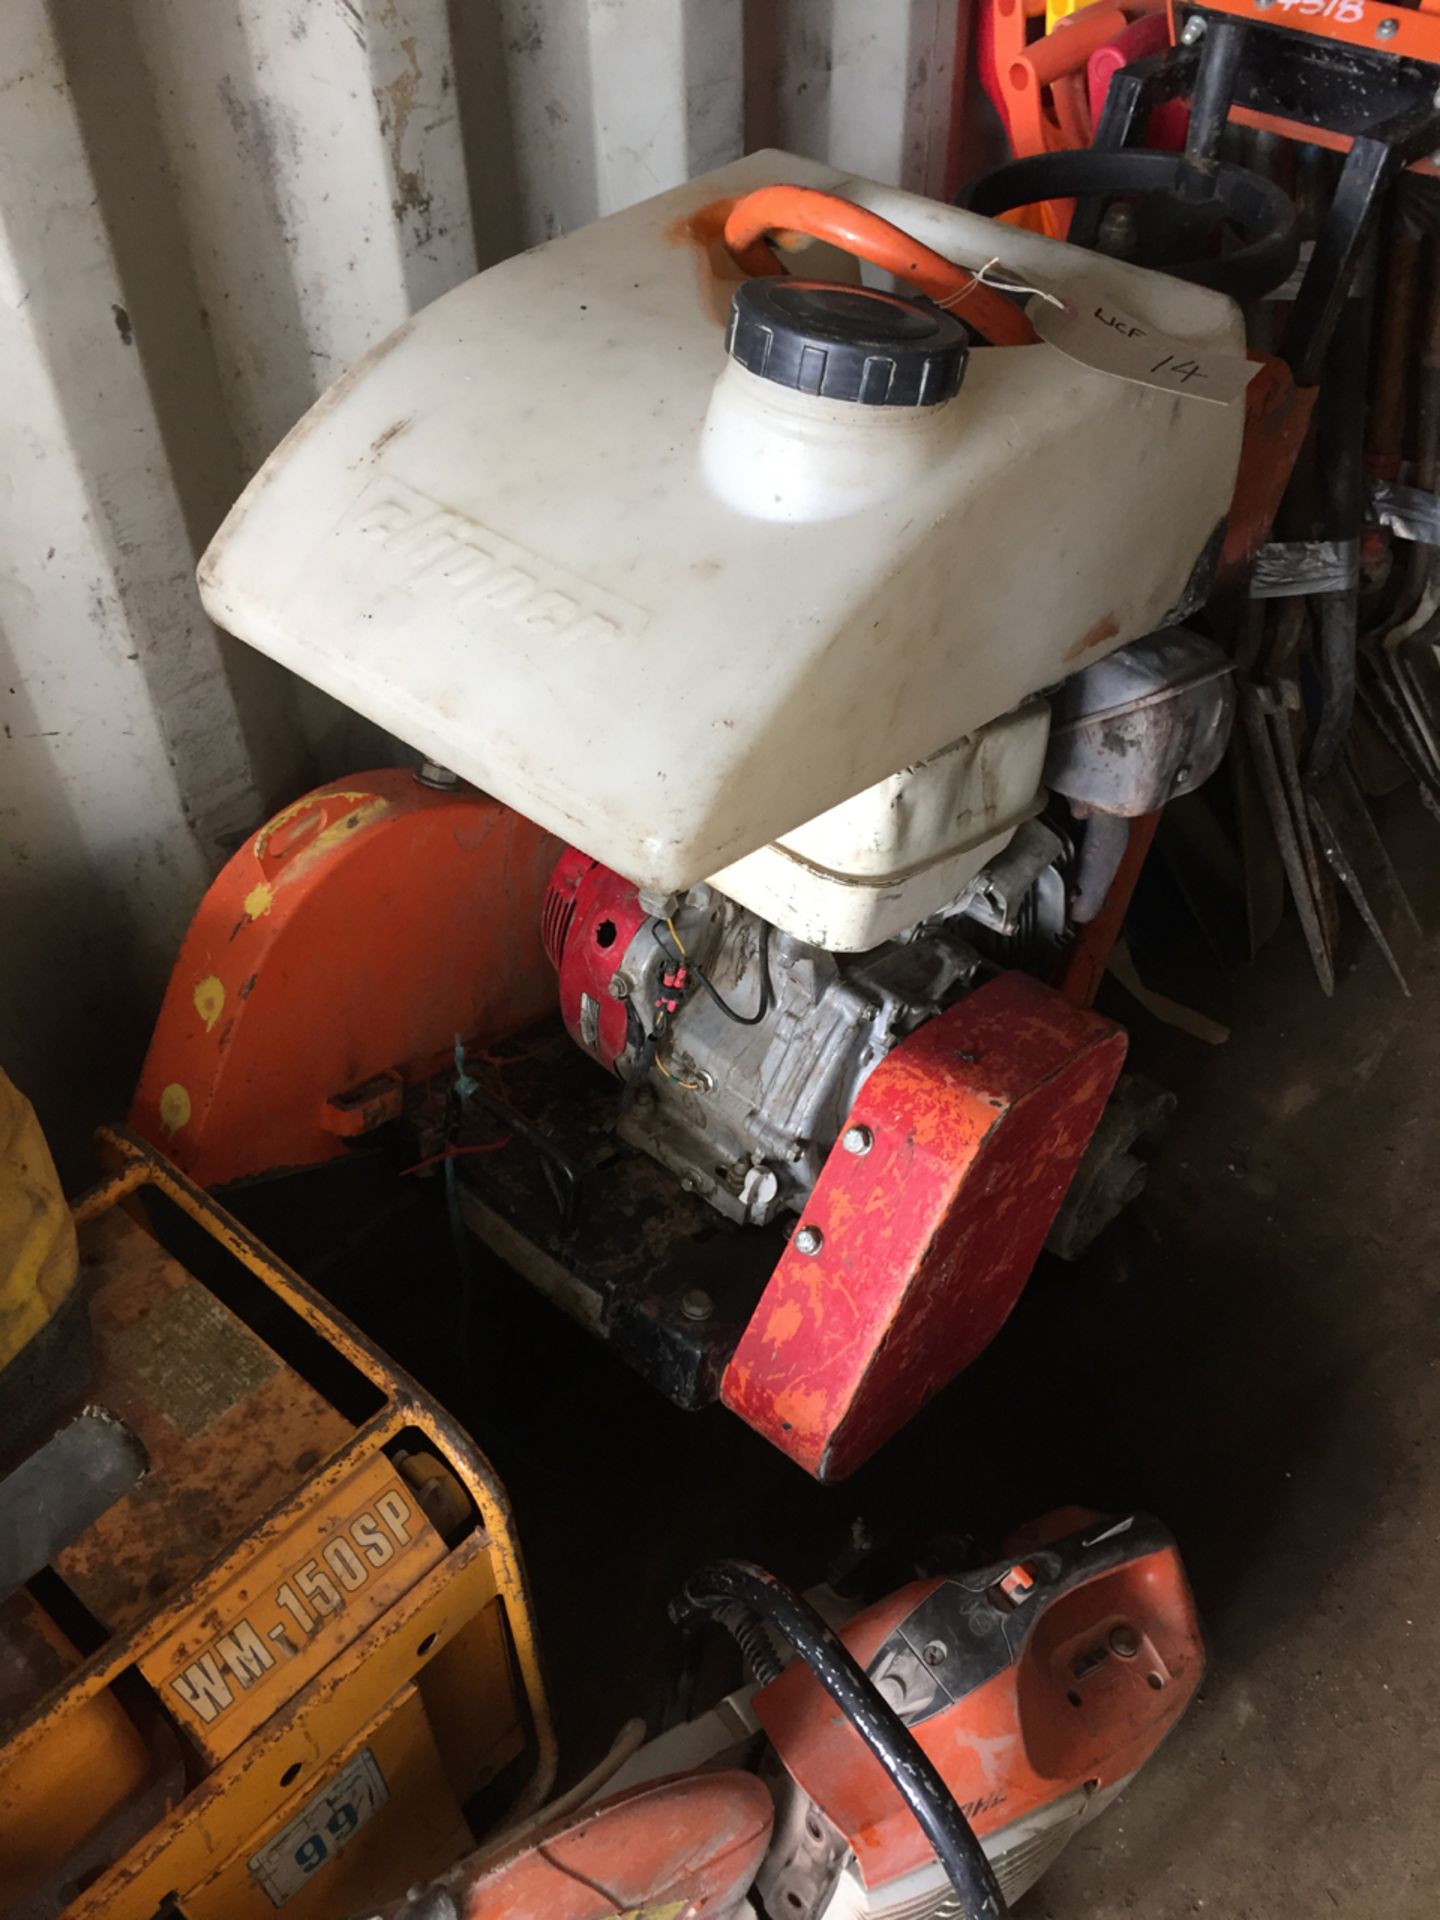 Clipper C451P13 18” Floor Saw - Honda Engine. - Fully working - No Reserve - Image 2 of 5